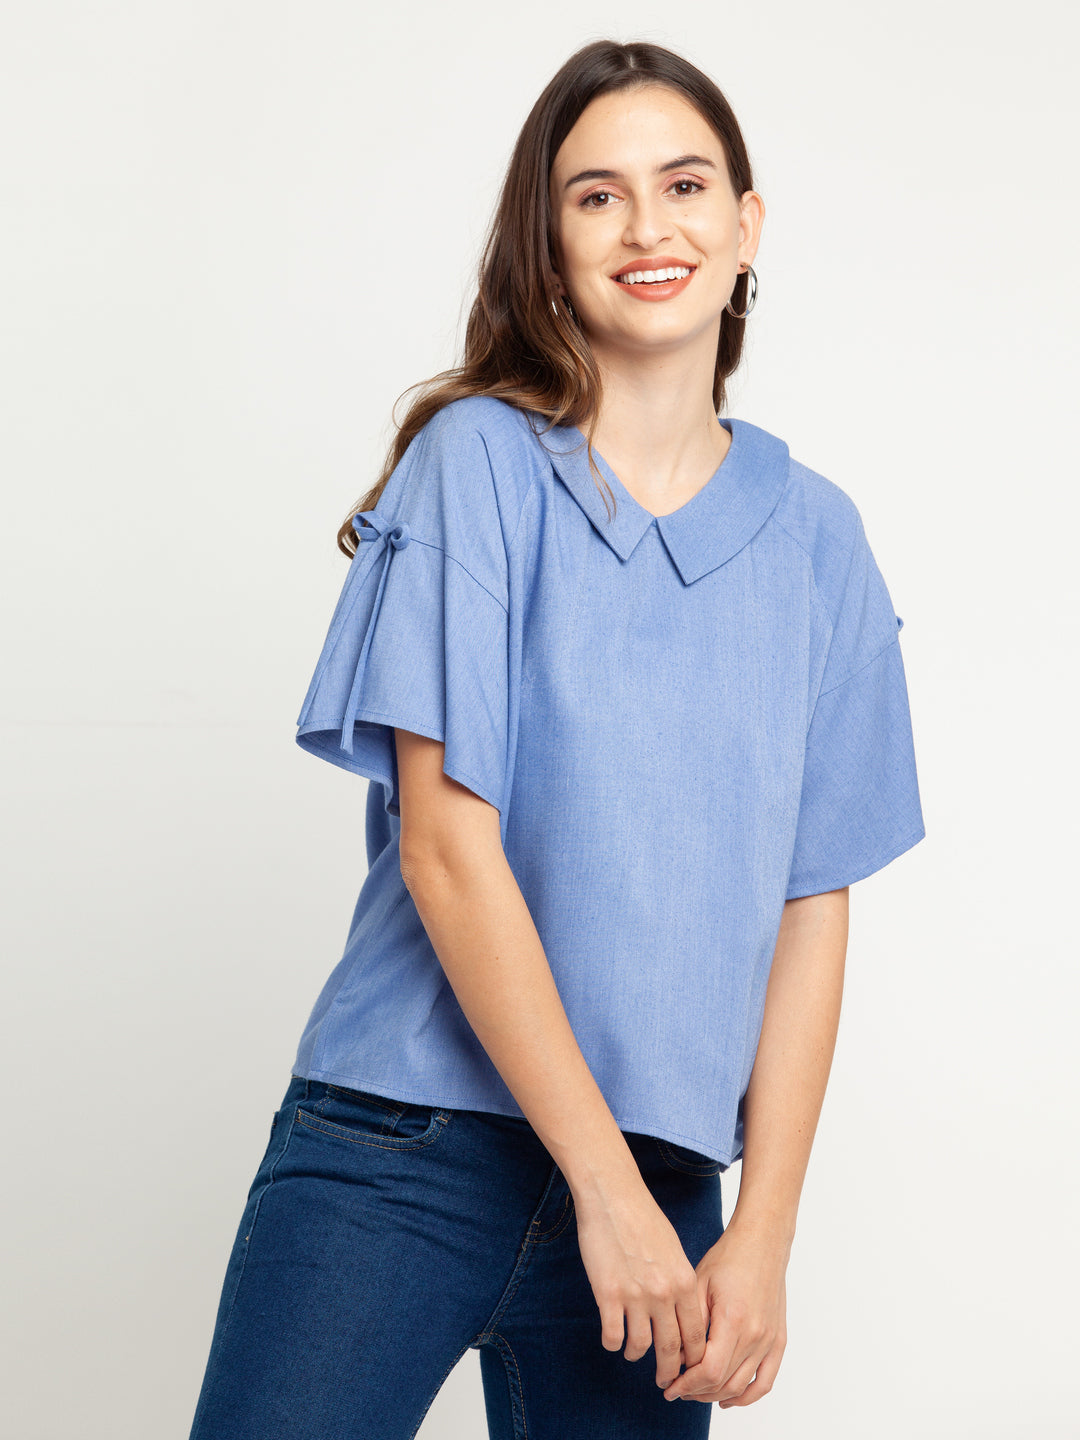 Blue Solid Top For Women